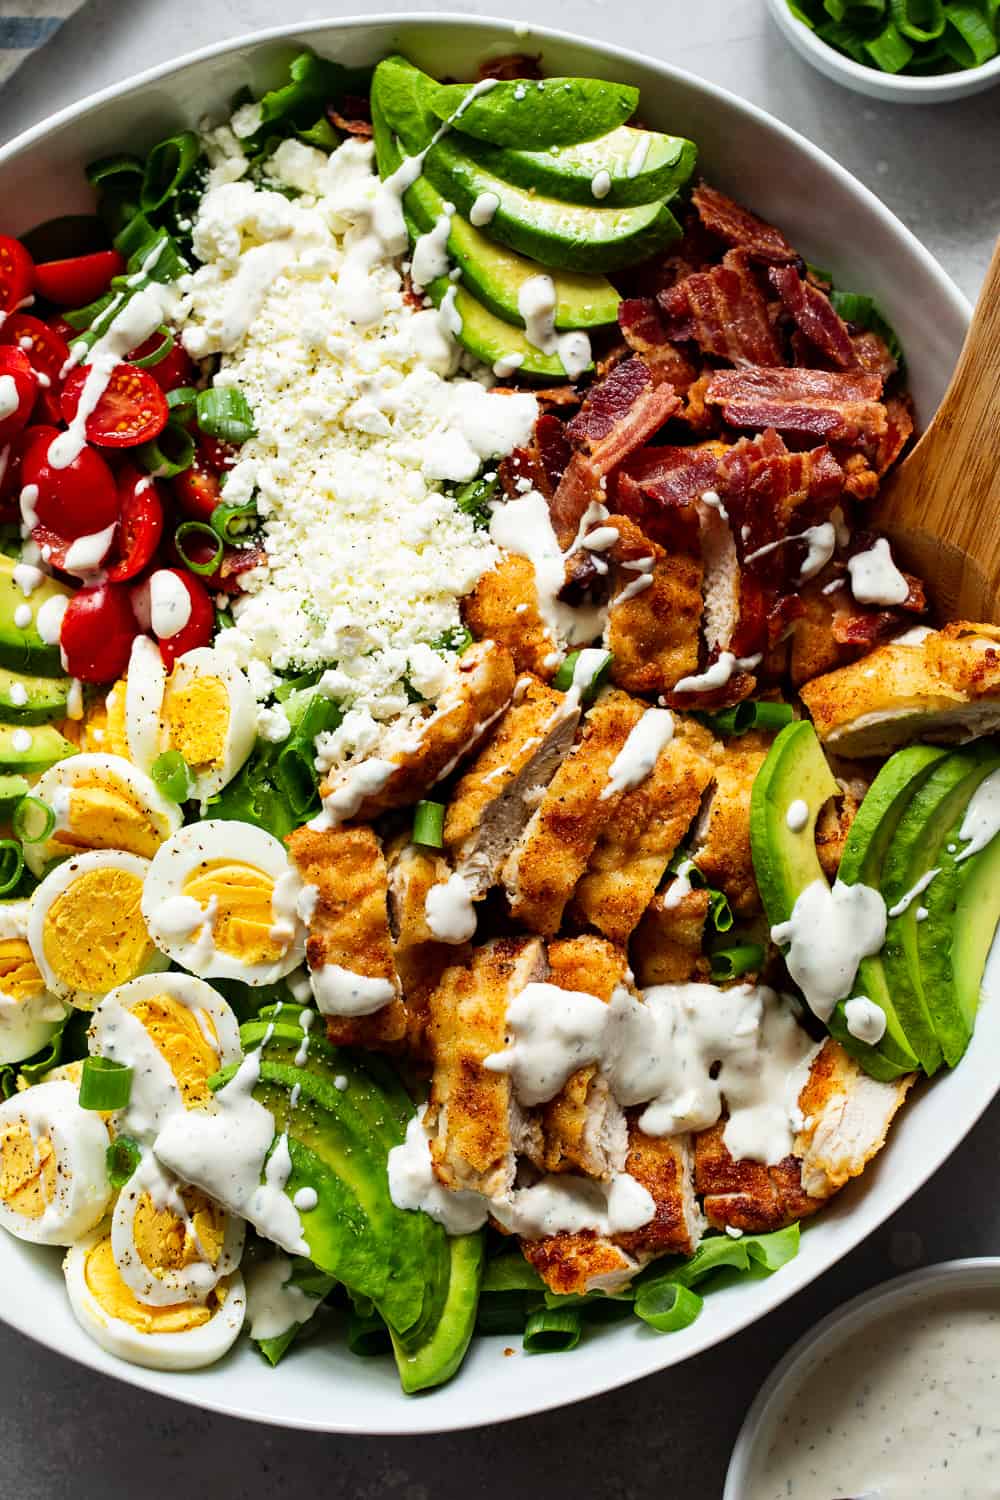 This crispy chicken cobb salad is my favorite one yet with flavorful crispy “breaded” chicken plus all the usual cobb salad goodies and a homemade garlic ranch dressing. It’s paleo, with a Whole30 option, low in carbs and family approved! #paleo #whole30 #cleaneating #keto #lowcarb